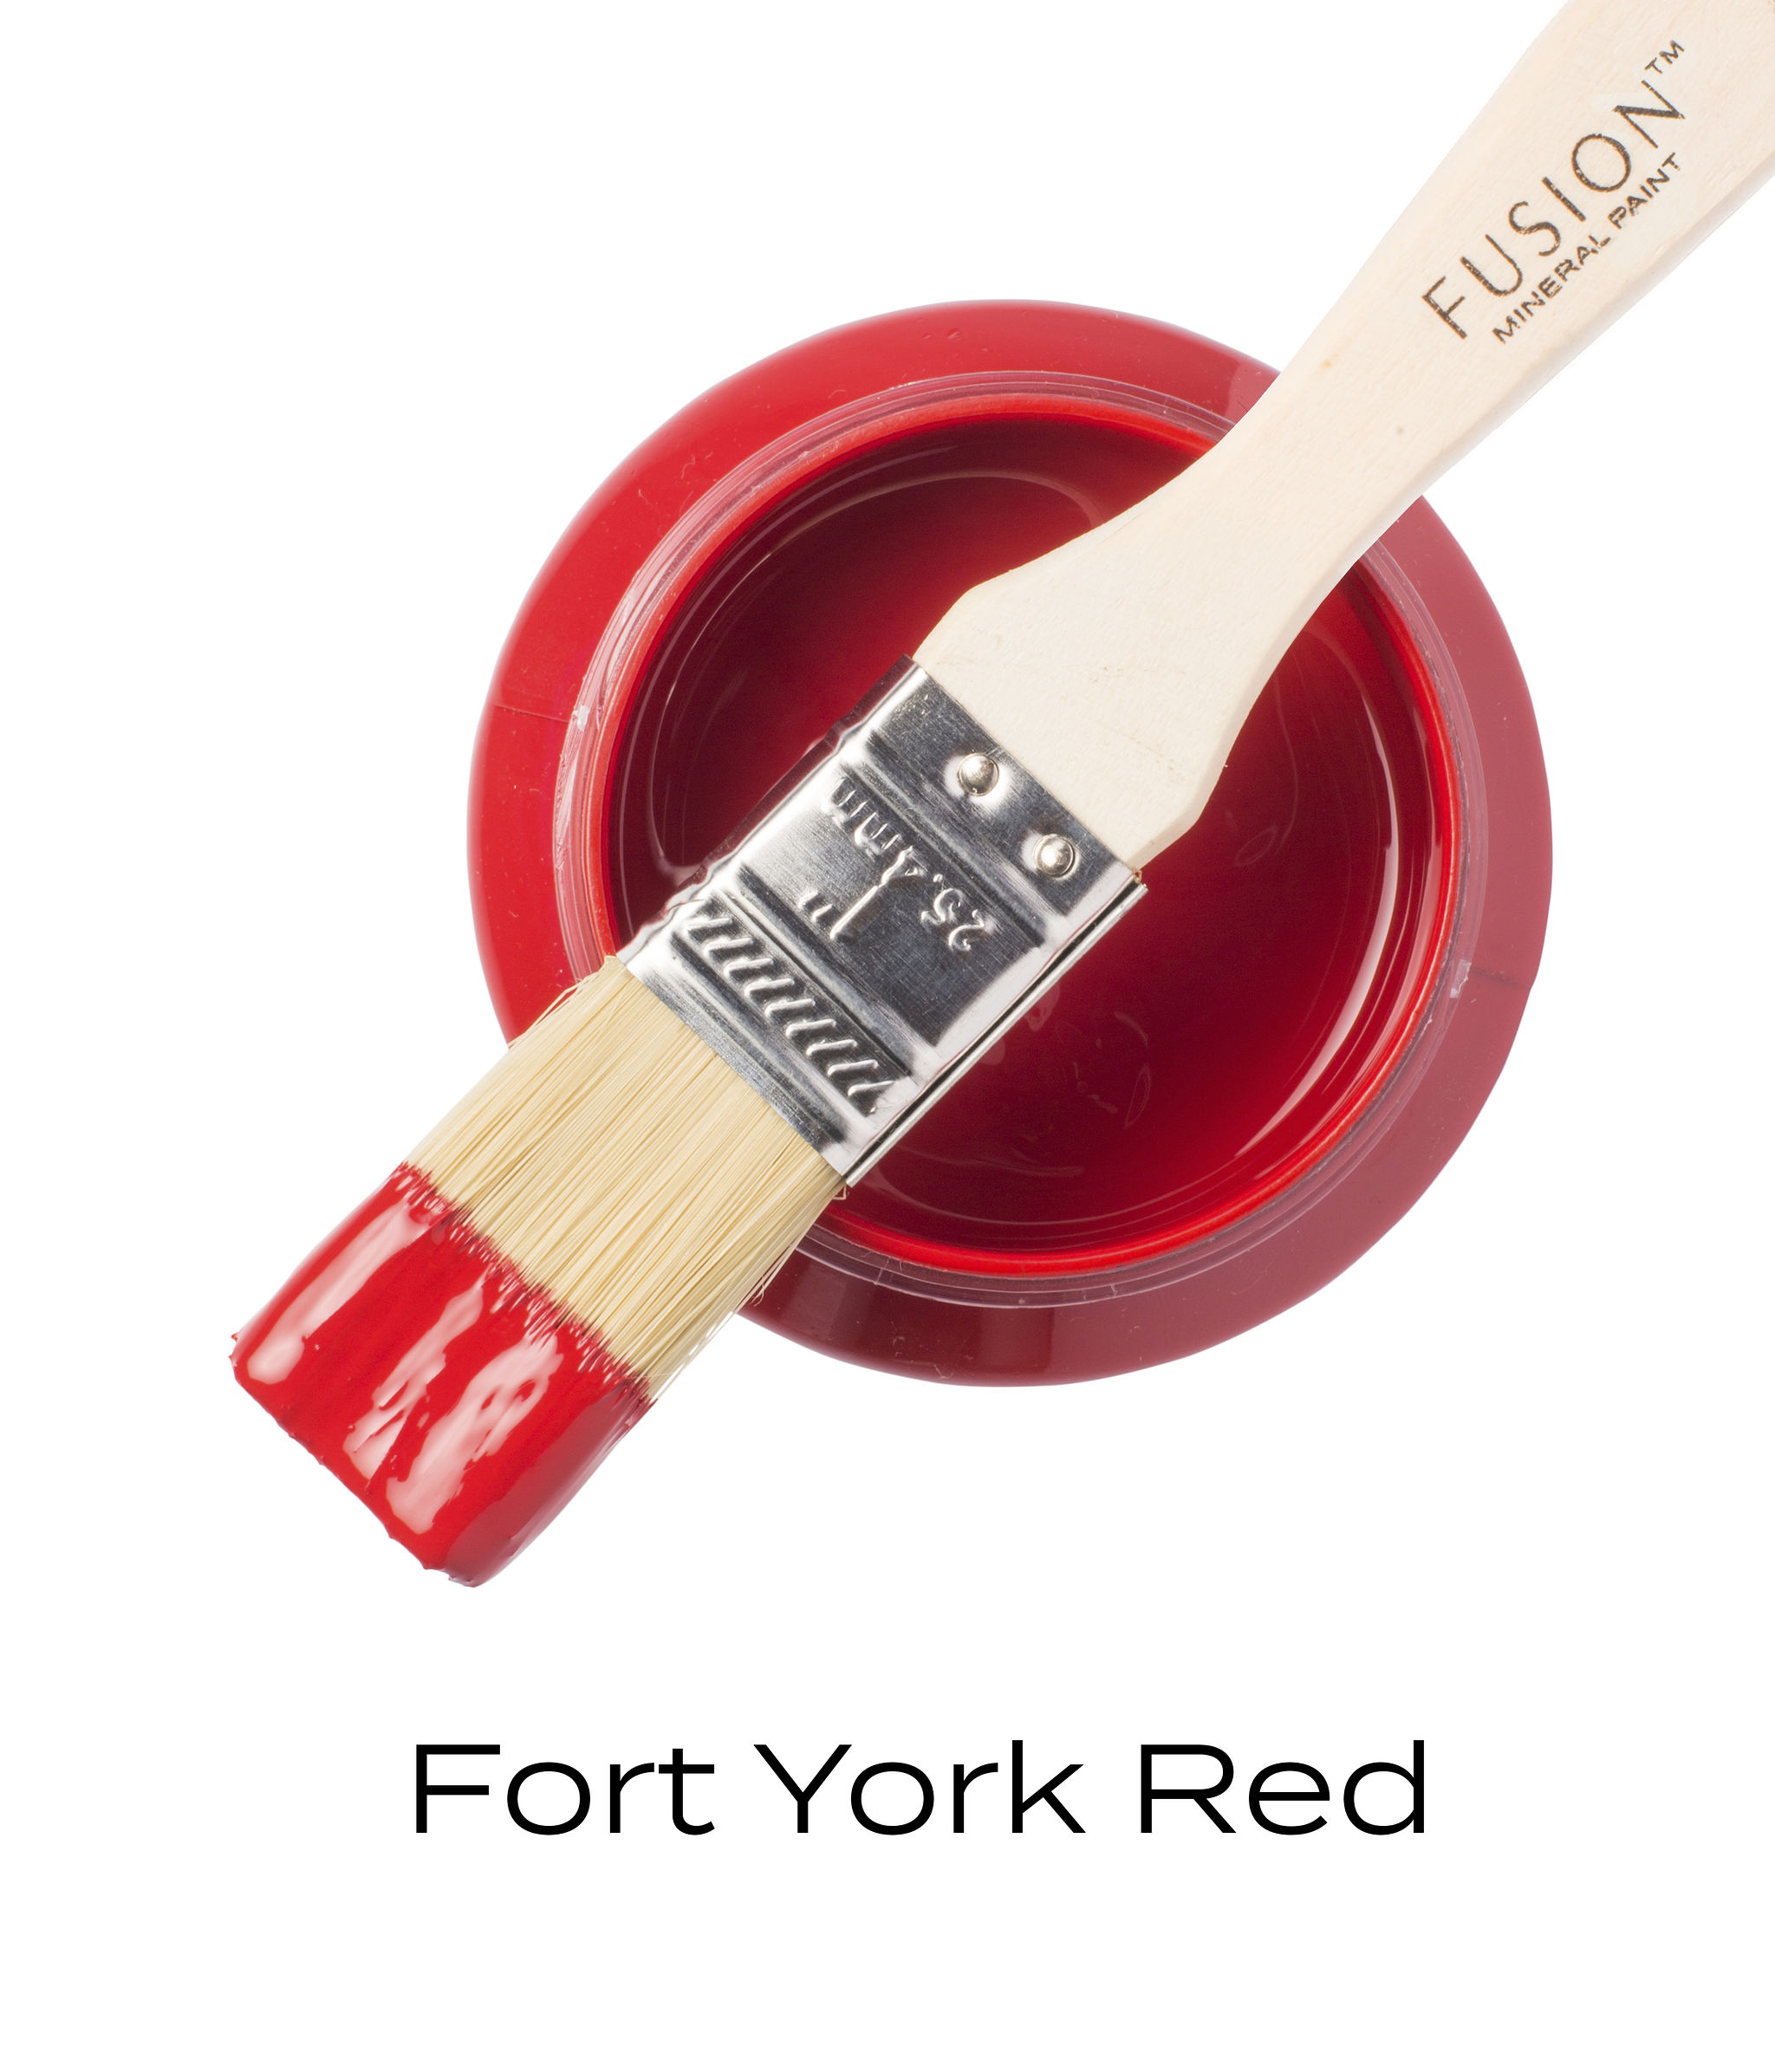 Fort York Red Fusion Minerail Paint Goed Gestyled Brielle